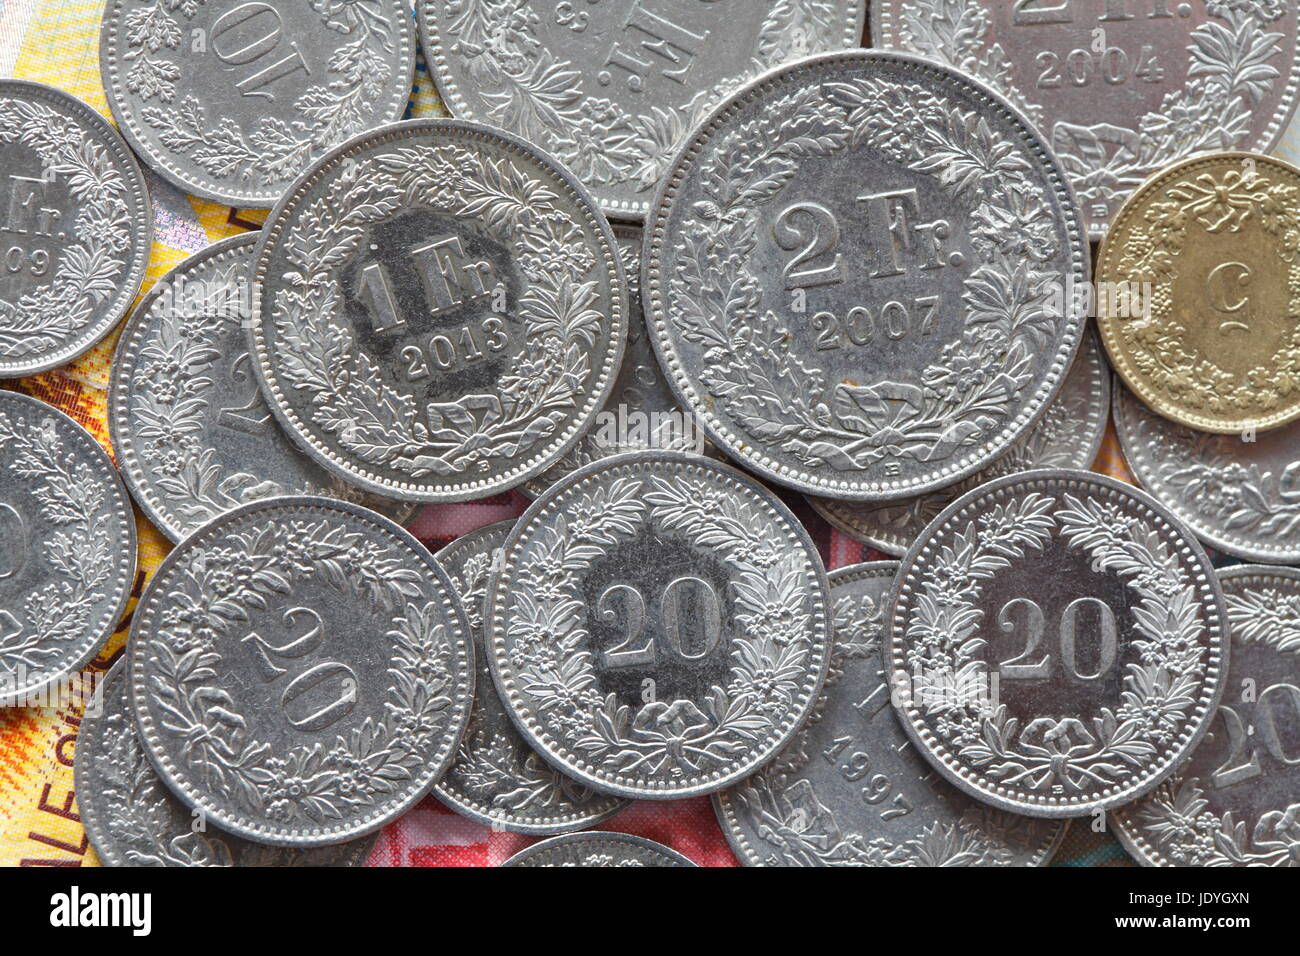 Swiss Francs and Rappen coins Stock Photo